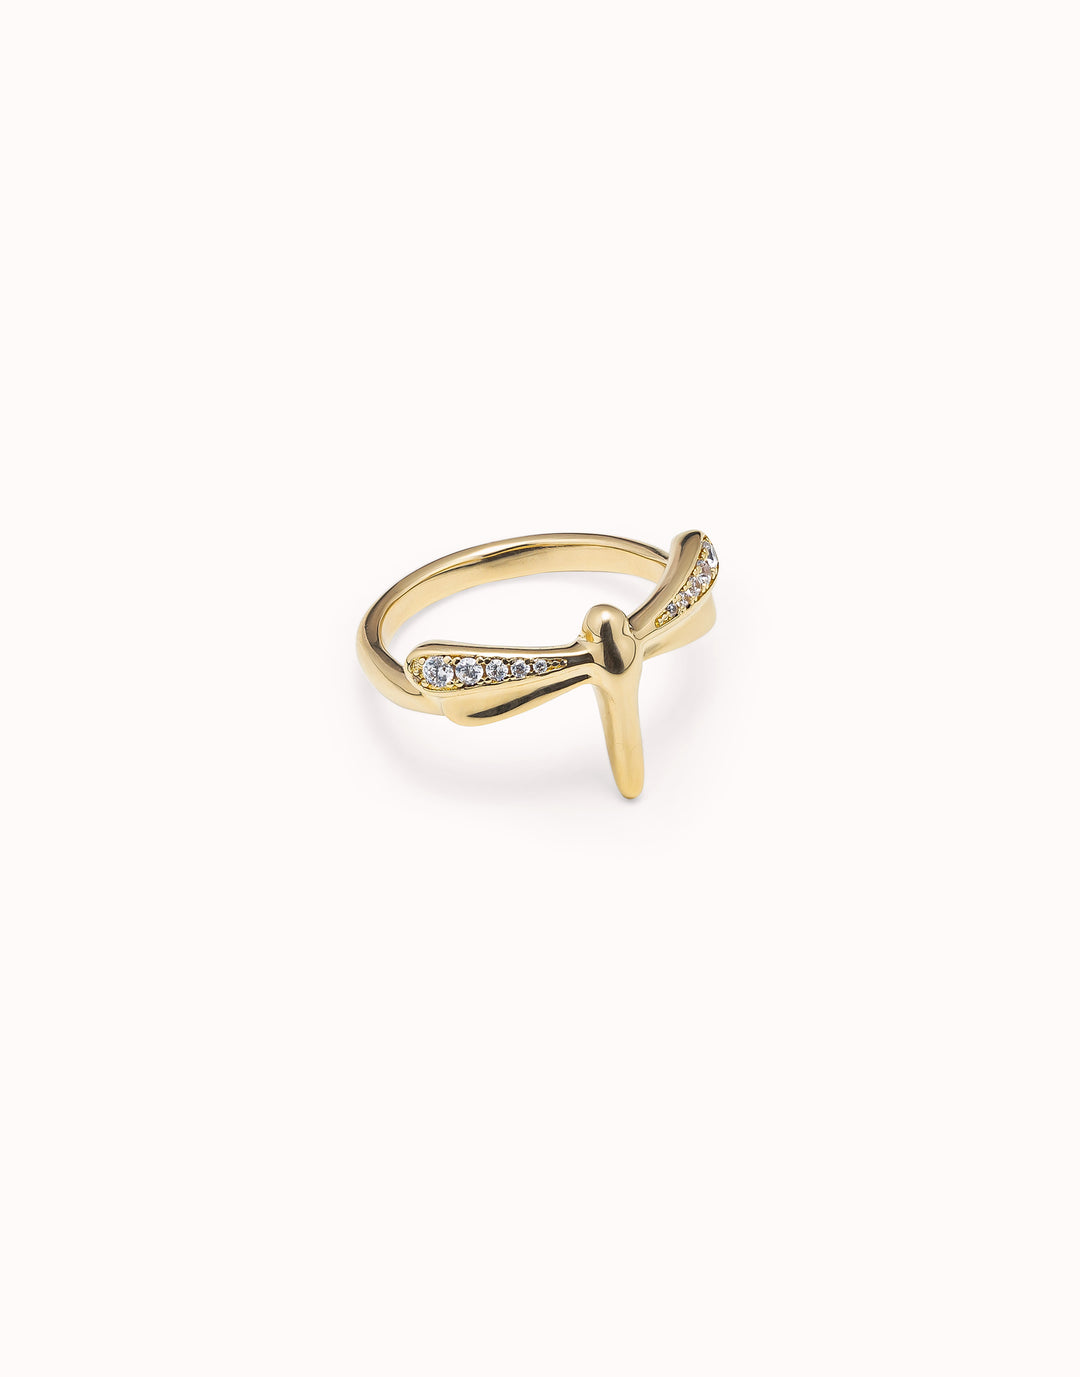 FORTUNE TOPAZ RING - GOLD - Kingfisher Road - Online Boutique